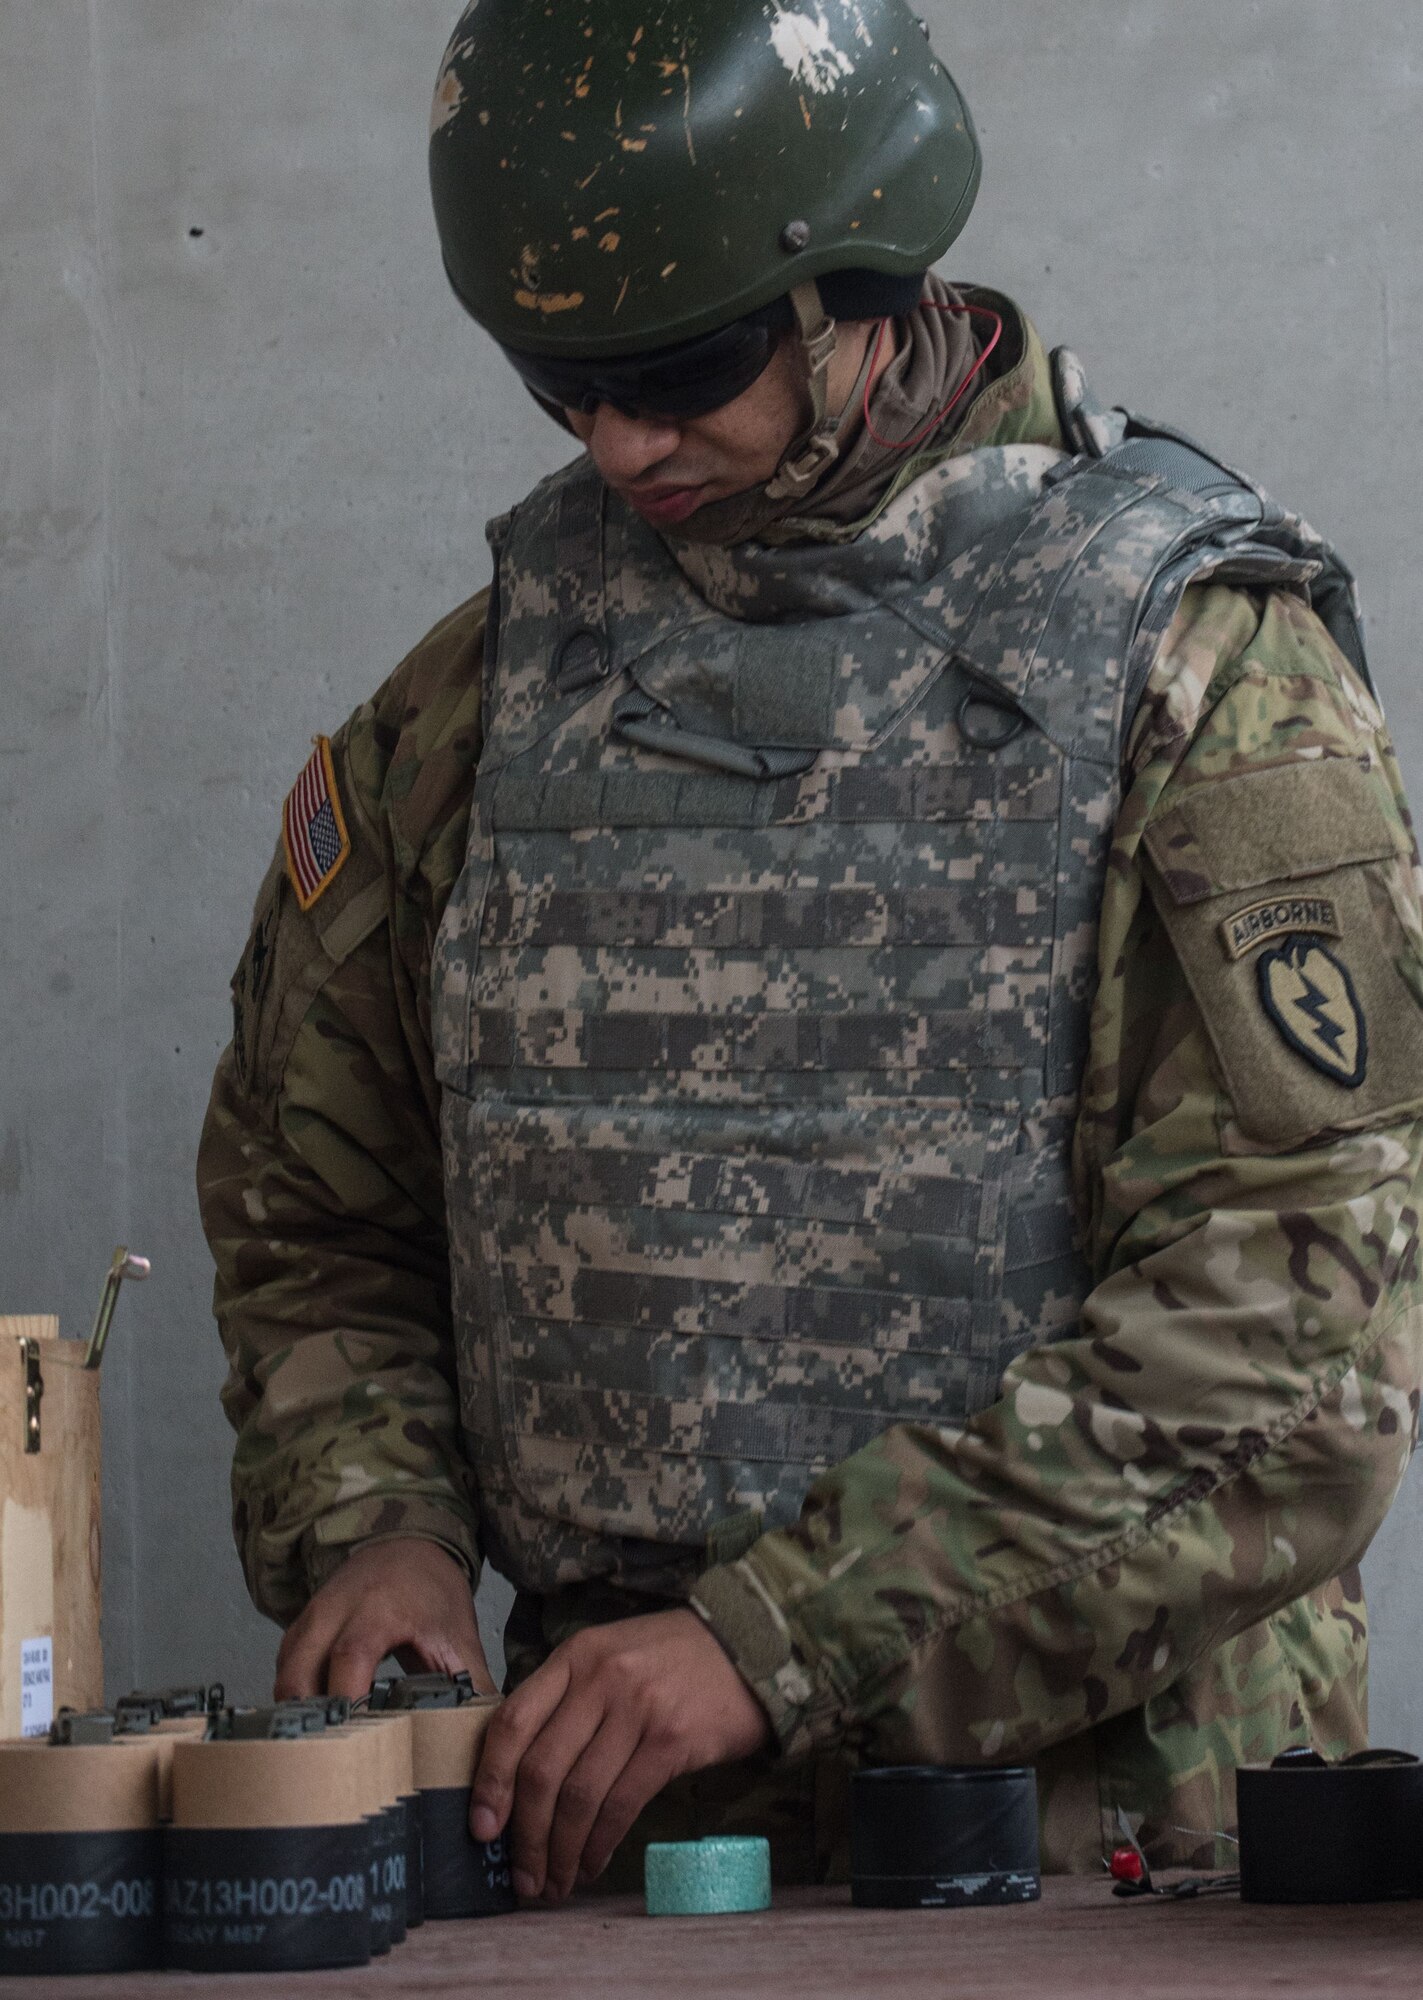 A paratrooper assigned to 3rd Battalion, 509th Parachute Infantry Regiment, 4th Infantry Brigade Combat Team (Airborne), 25th Infantry Division, U.S. Army Alaska, prepares M67 fragmentation grenades for live-fire training at Kraft Range on Joint Base Elmendorf-Richardson, Alaska, Dec. 12, 2017. A ‘pit’ noncommissioned officer supervised the Soldiers throwing grenades to maintain a safe instructional environment, enforce precaution standards, and direct them on proper handling of explosives. The fragmentation hand grenade has a lethal radius of five meters and can produce casualties up to 15 meters, dispersing fragments as far as 230 meters.